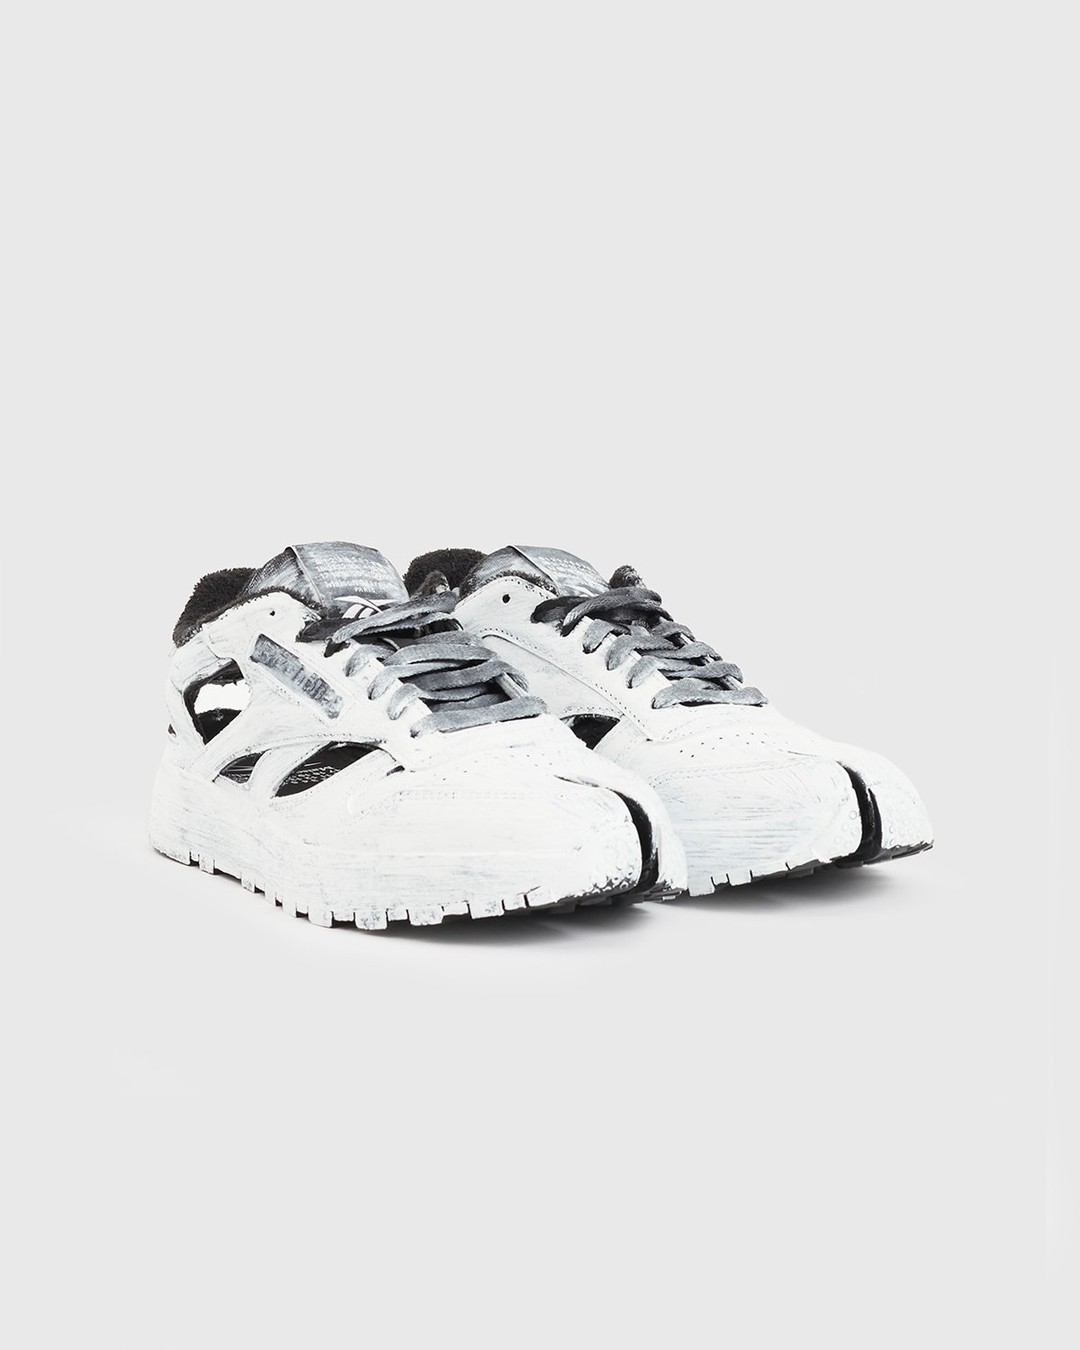 Maison Margiela x Reebok – Classic Leather Tabi Low Bianchetto - Low Top Sneakers - White - Image 2